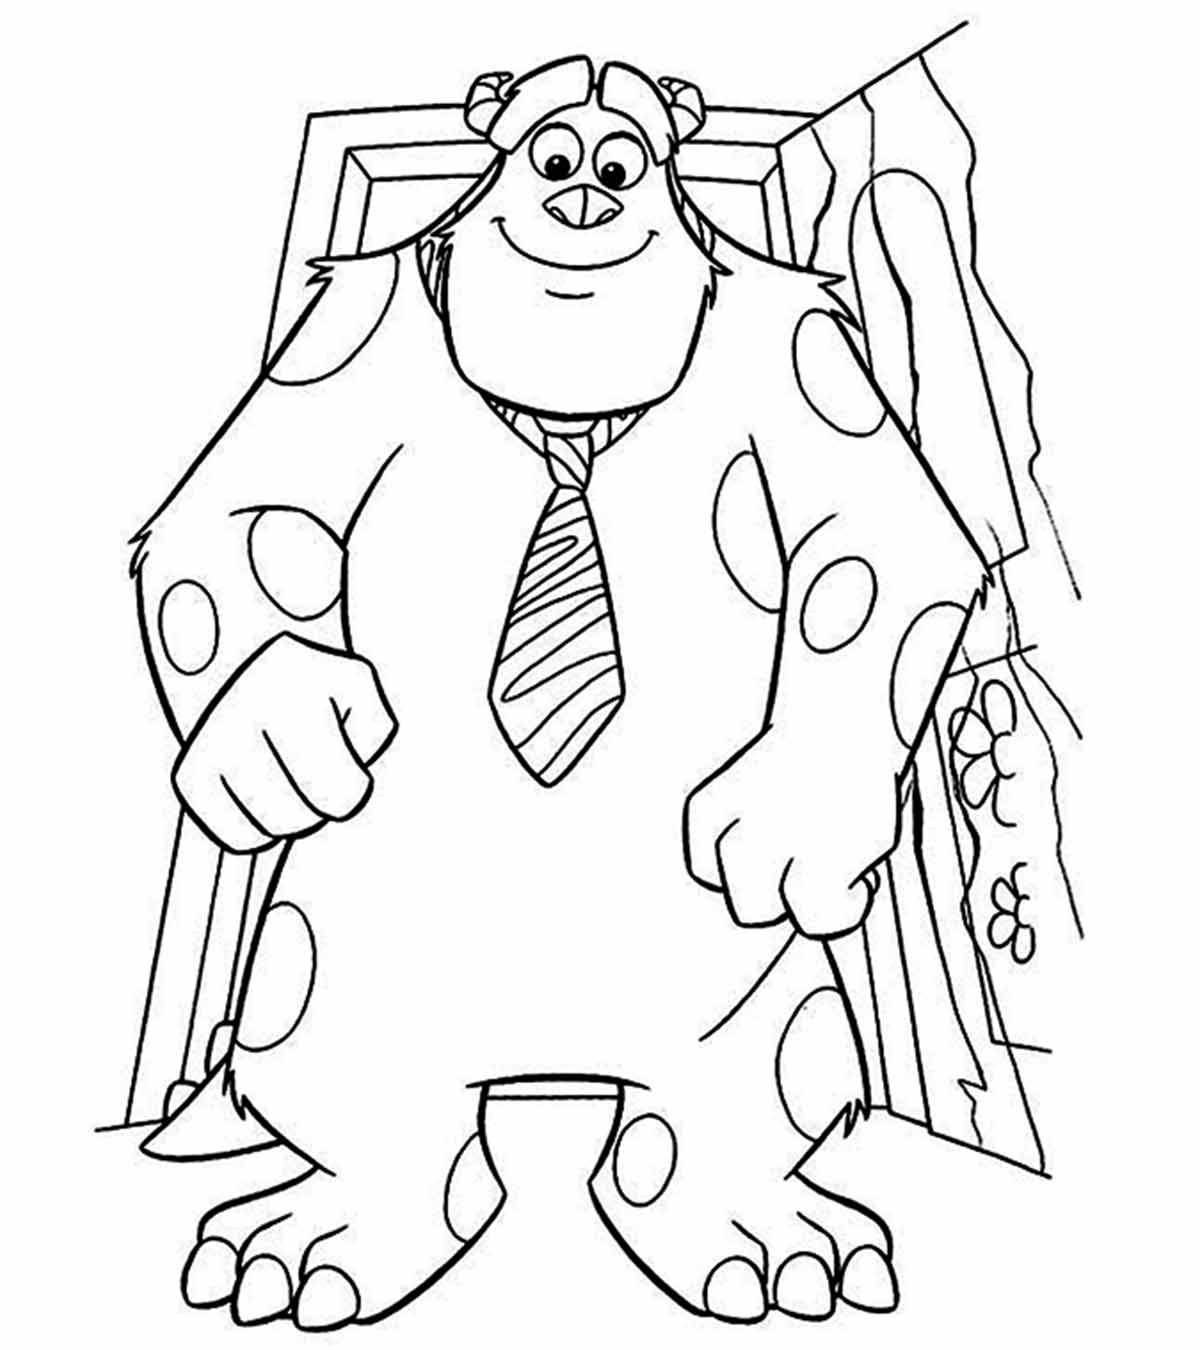 monsters-inc-coloring-pages-monster-coloring-pages-cartoon-coloring